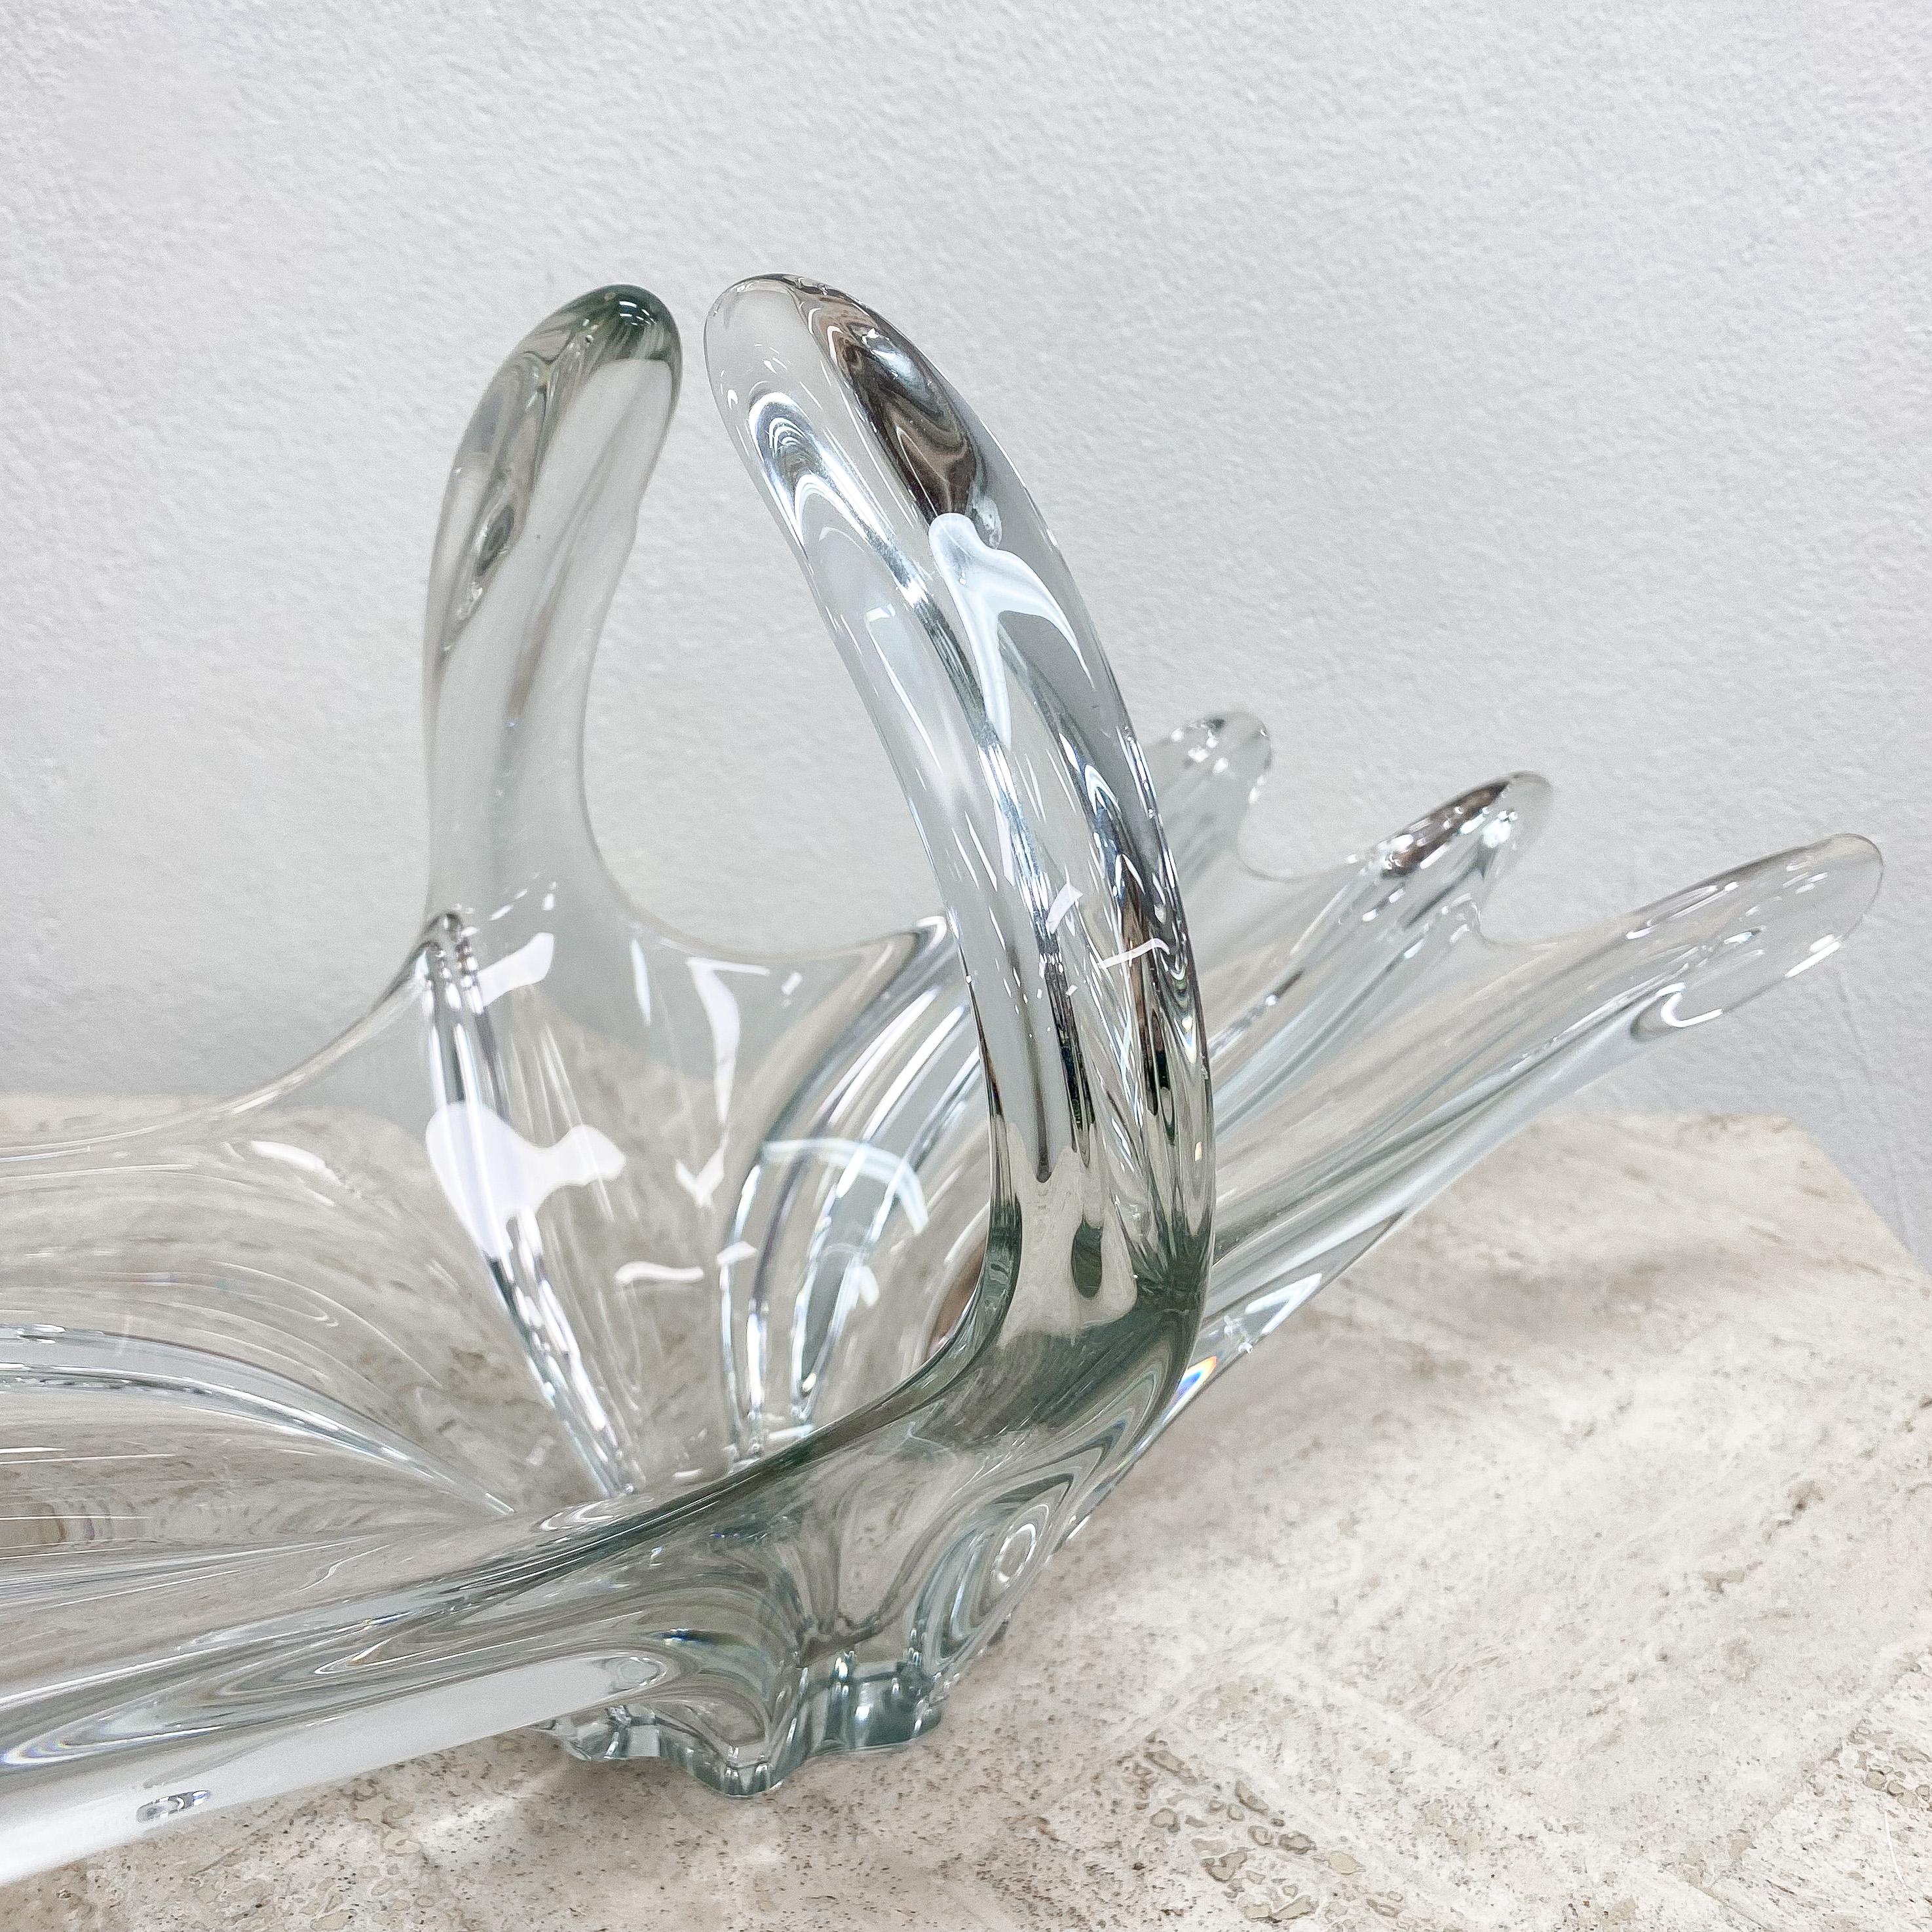 Stunning 1960's hand crafted Art Vannes French crystal centerpiece fruit bowl. The factory mark Art Vannes France is etched to the base.

In excellent condition with no chips or cracks.